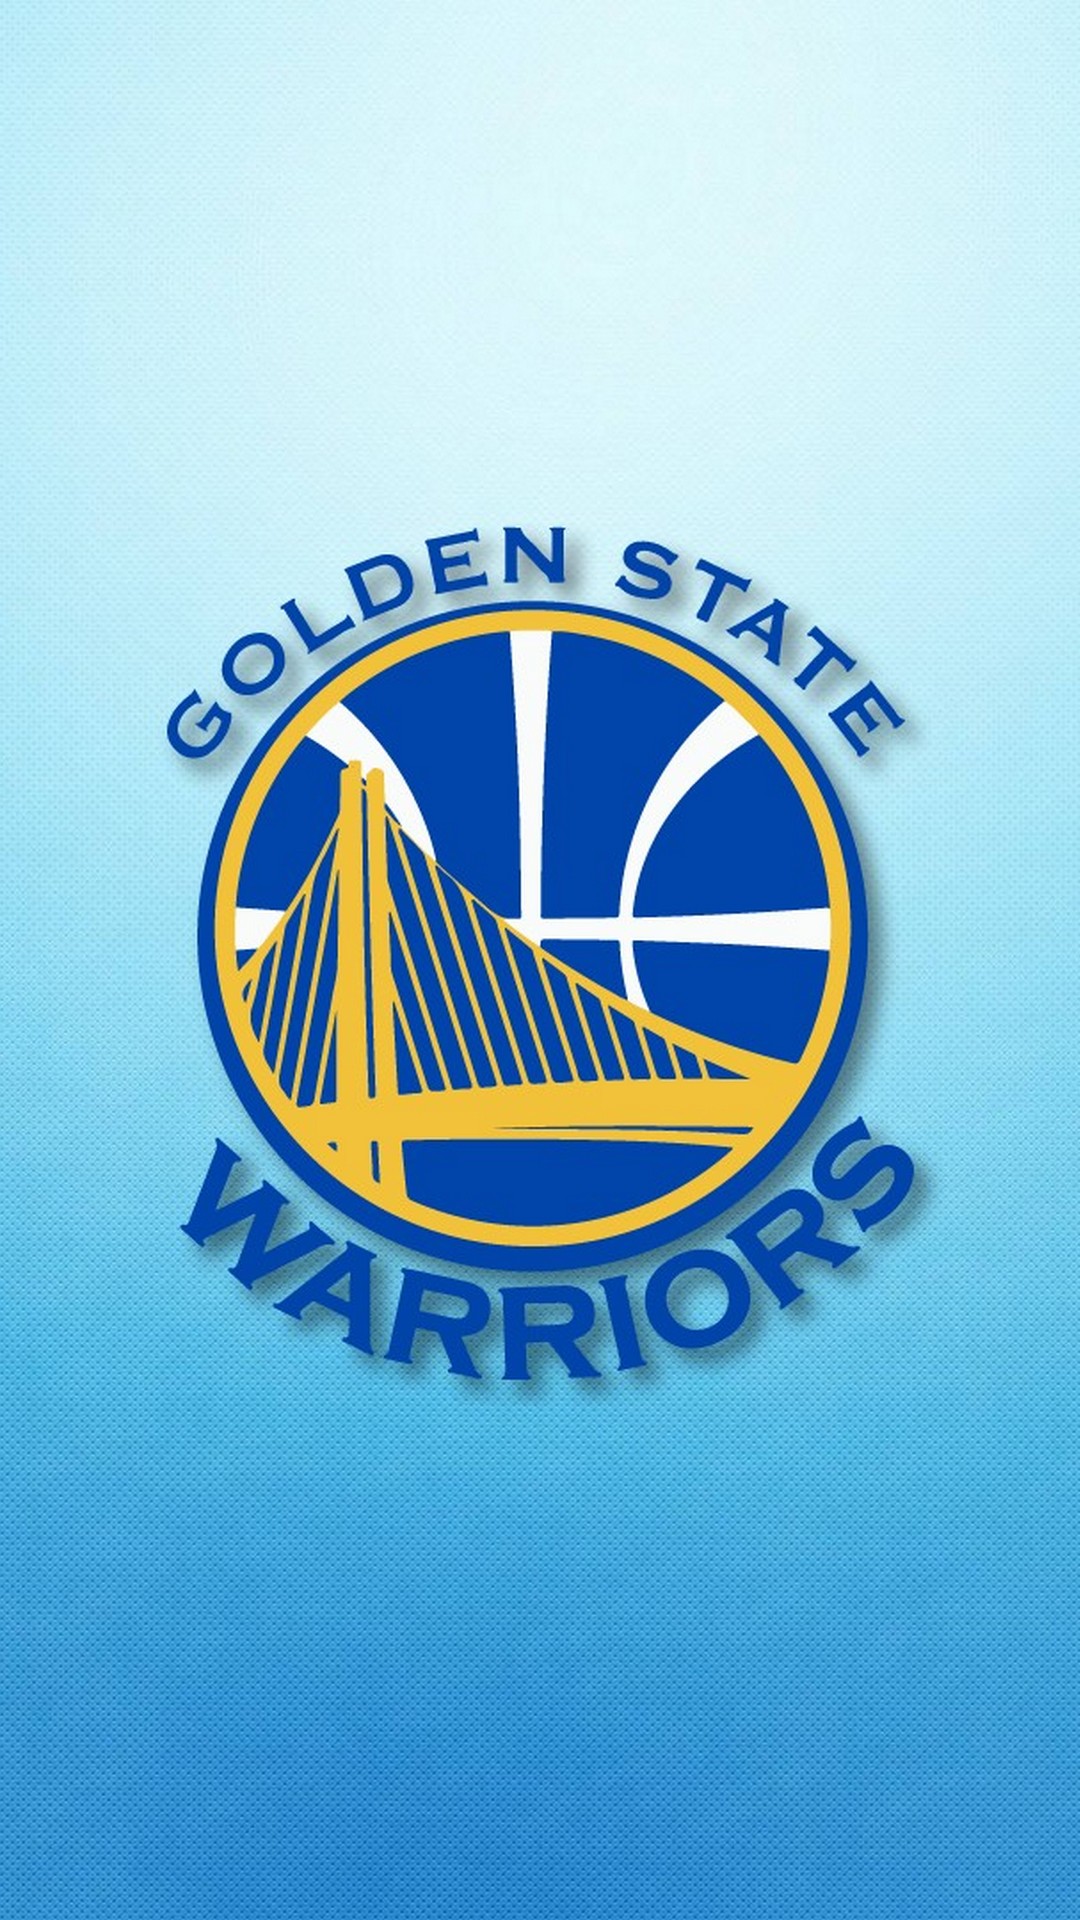 Wallpaper Golden State Warriors Android with image resolution 1080x1920 pixel. You can make this wallpaper for your Android backgrounds, Tablet, Smartphones Screensavers and Mobile Phone Lock Screen